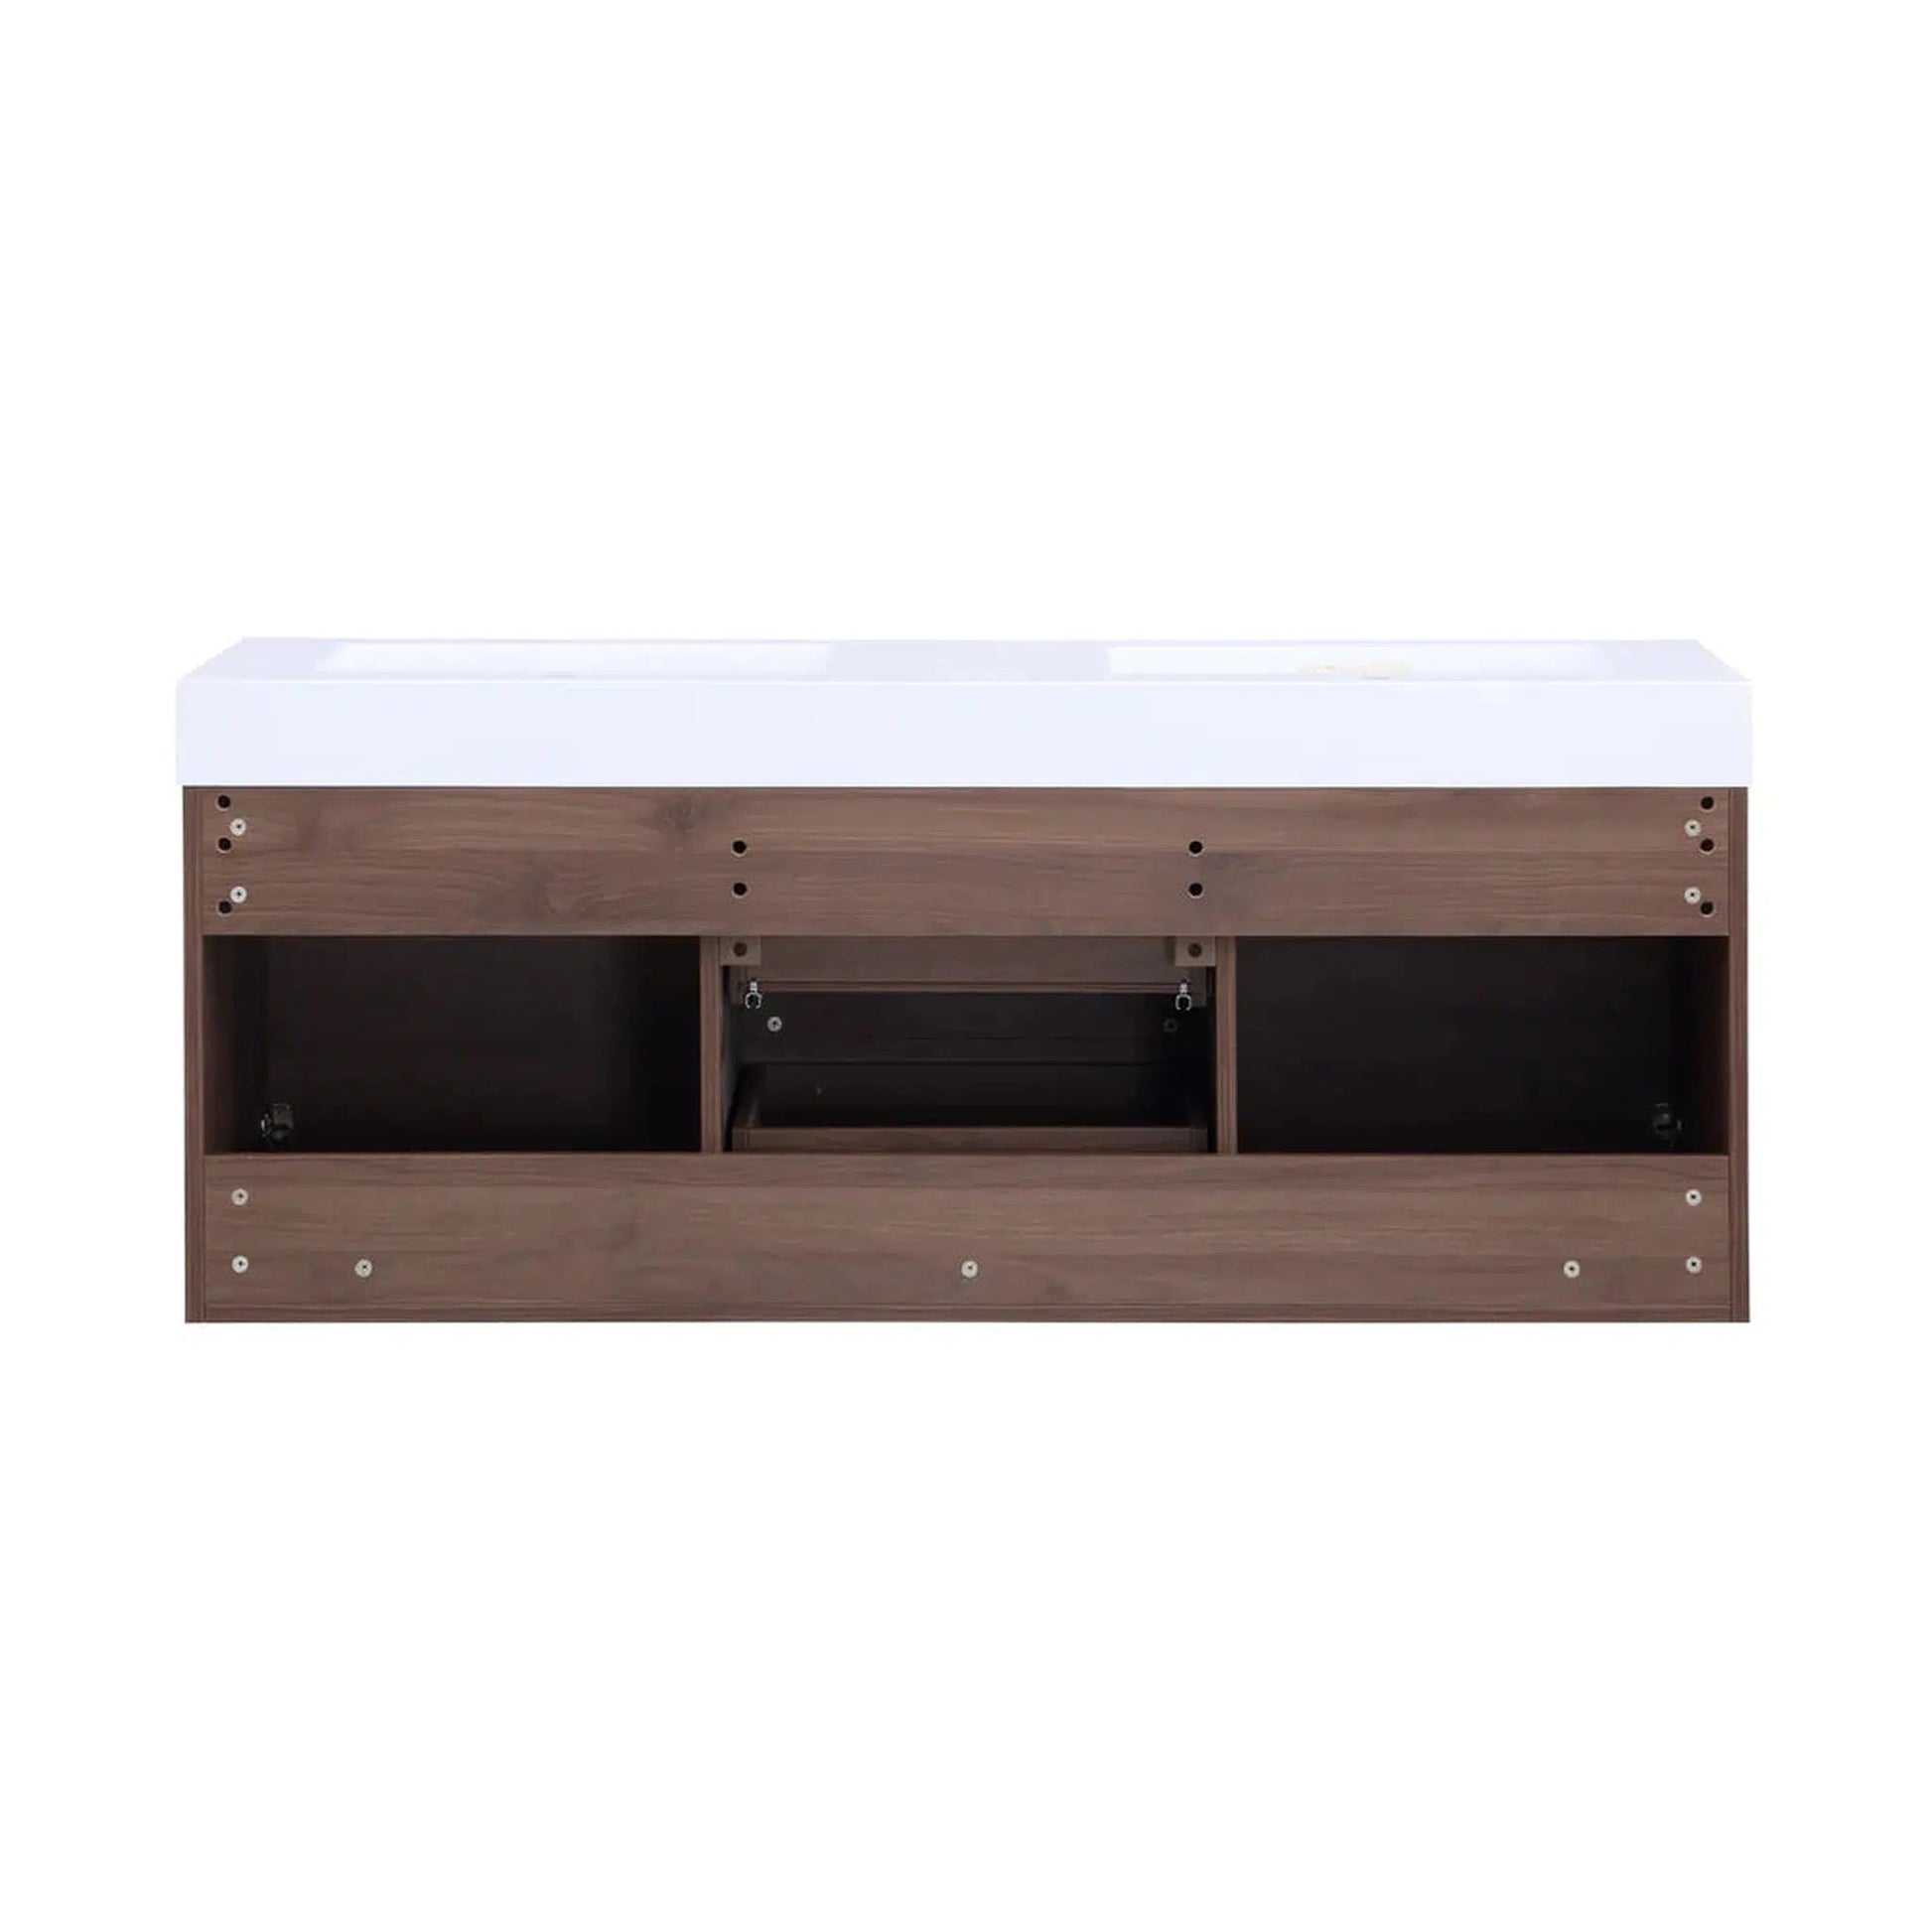 Stufurhome Valeria 59" Walnut Wall-Mounted Double Sink Bathroom Vanity with Rectangular Double Resin Sinks, 2 Drawers, 2 Doors and 2 Pre-Drilled Faucet Holes